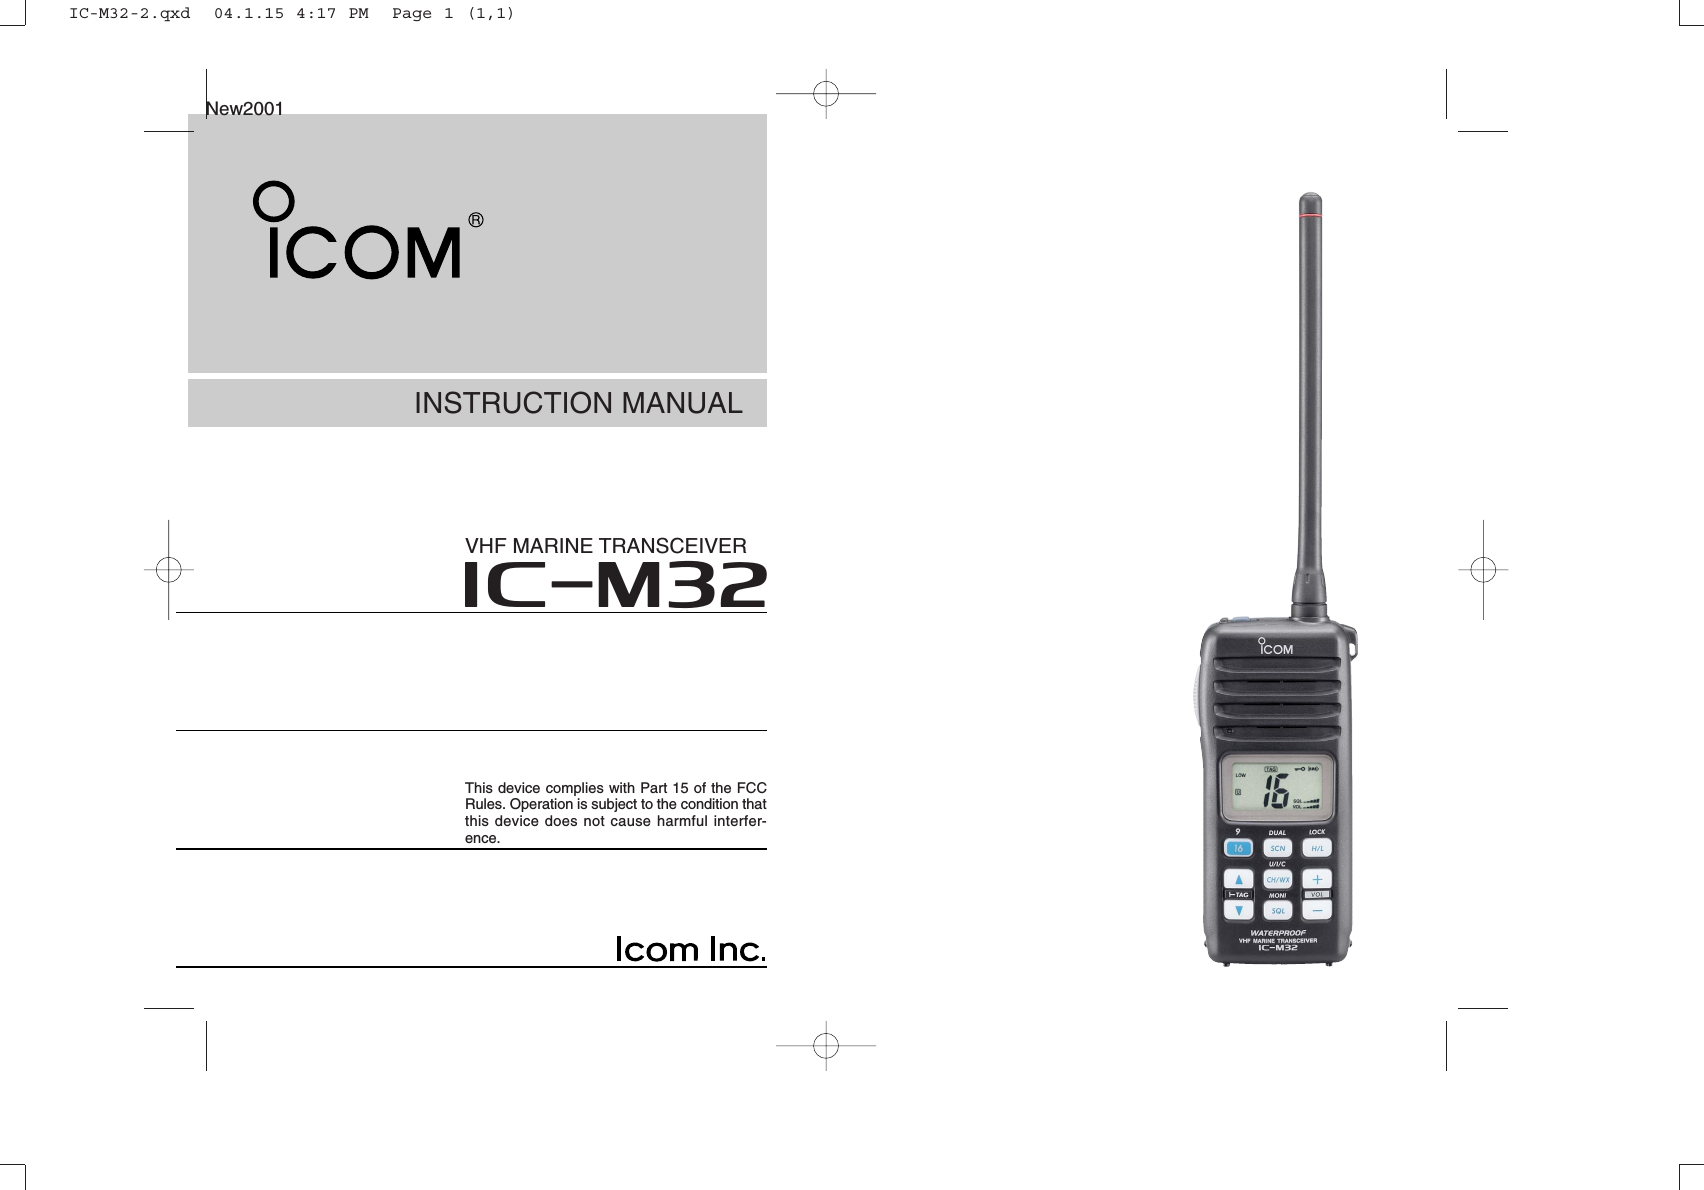 INSTRUCTION MANUALiM32VHF MARINE TRANSCEIVERThis device complies with Part 15 of the FCCRules. Operation is subject to the condition thatthis device does not cause harmful interfer-ence.New2001IC-M32-2.qxd  04.1.15 4:17 PM  Page 1 (1,1)